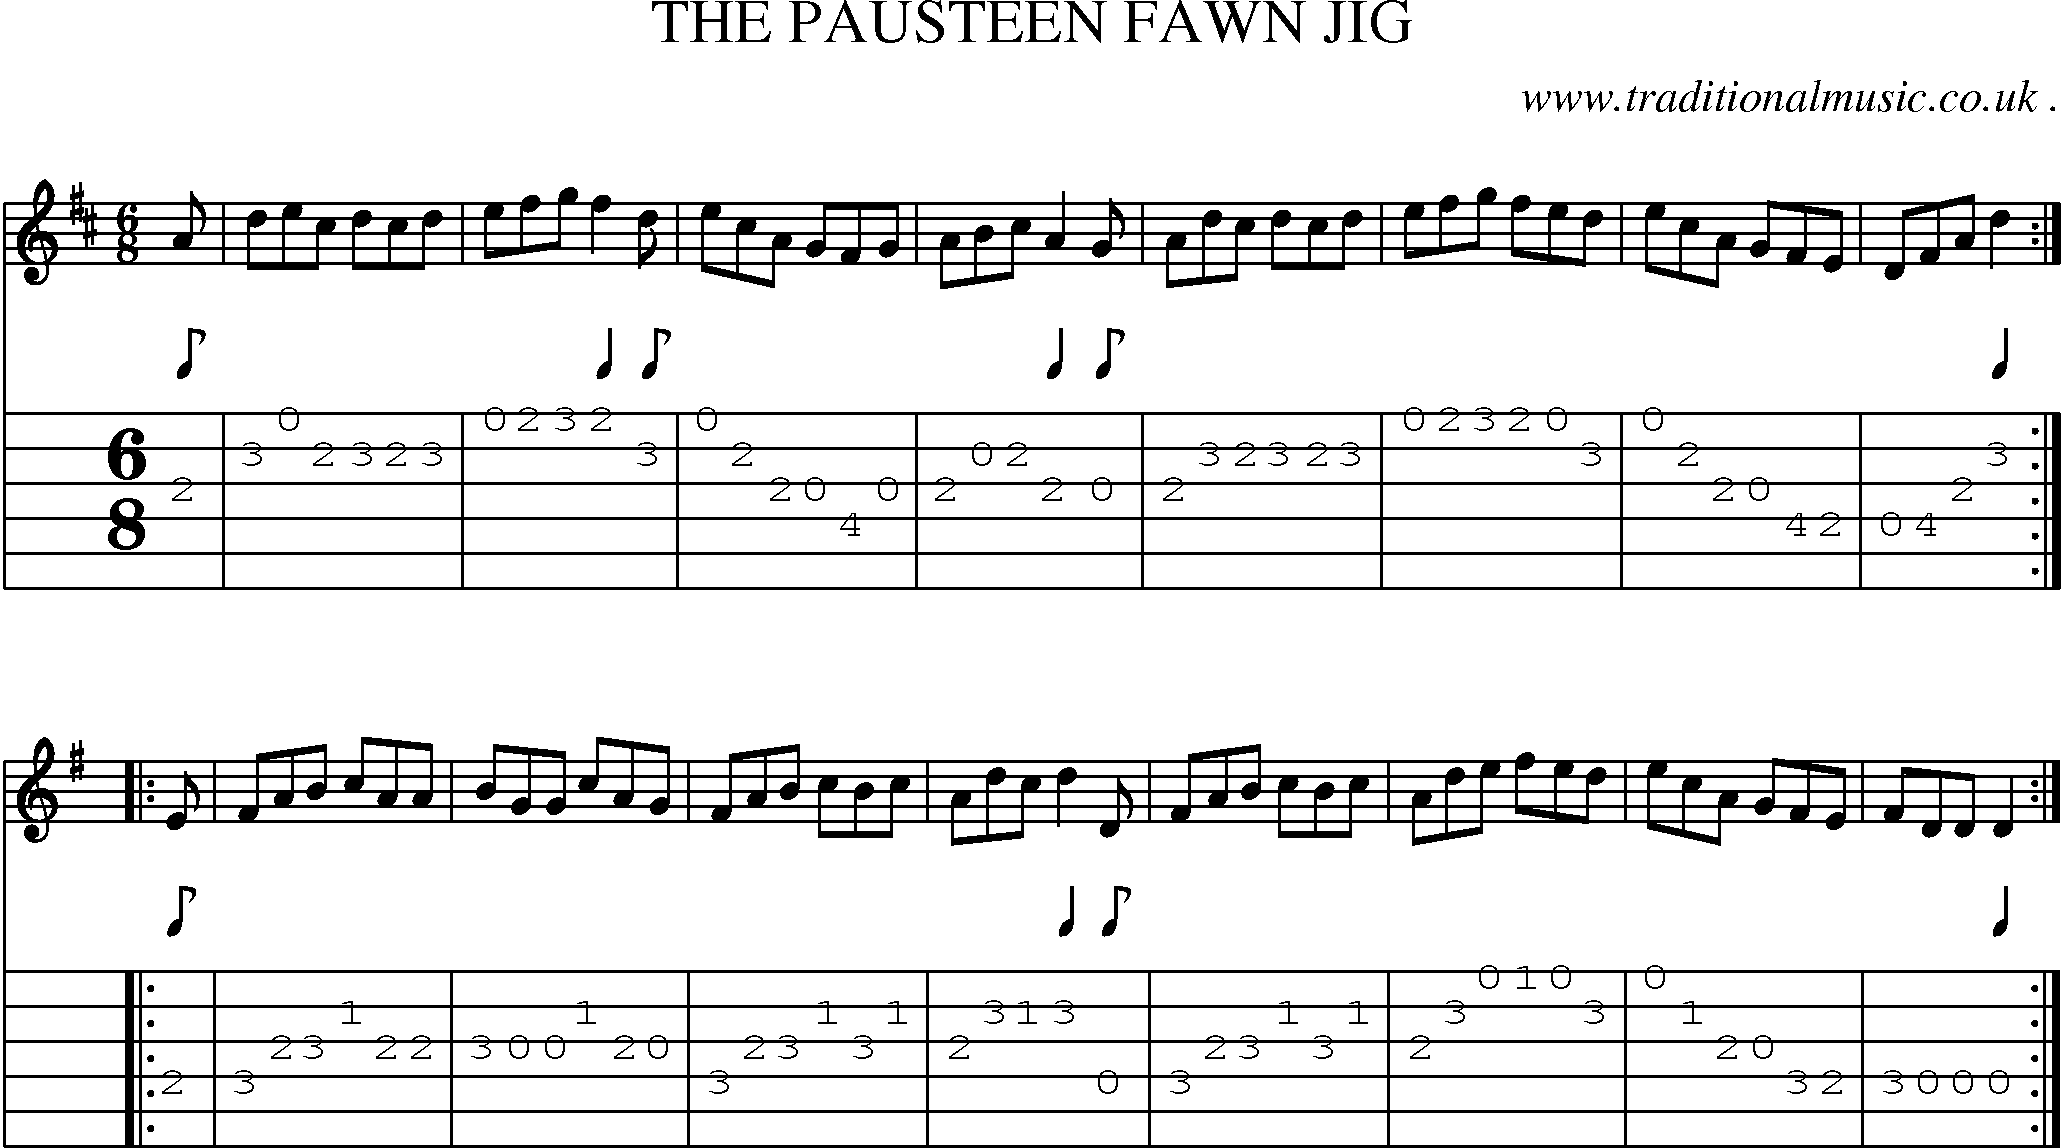 Sheet-Music and Guitar Tabs for The Pausteen Fawn Jig